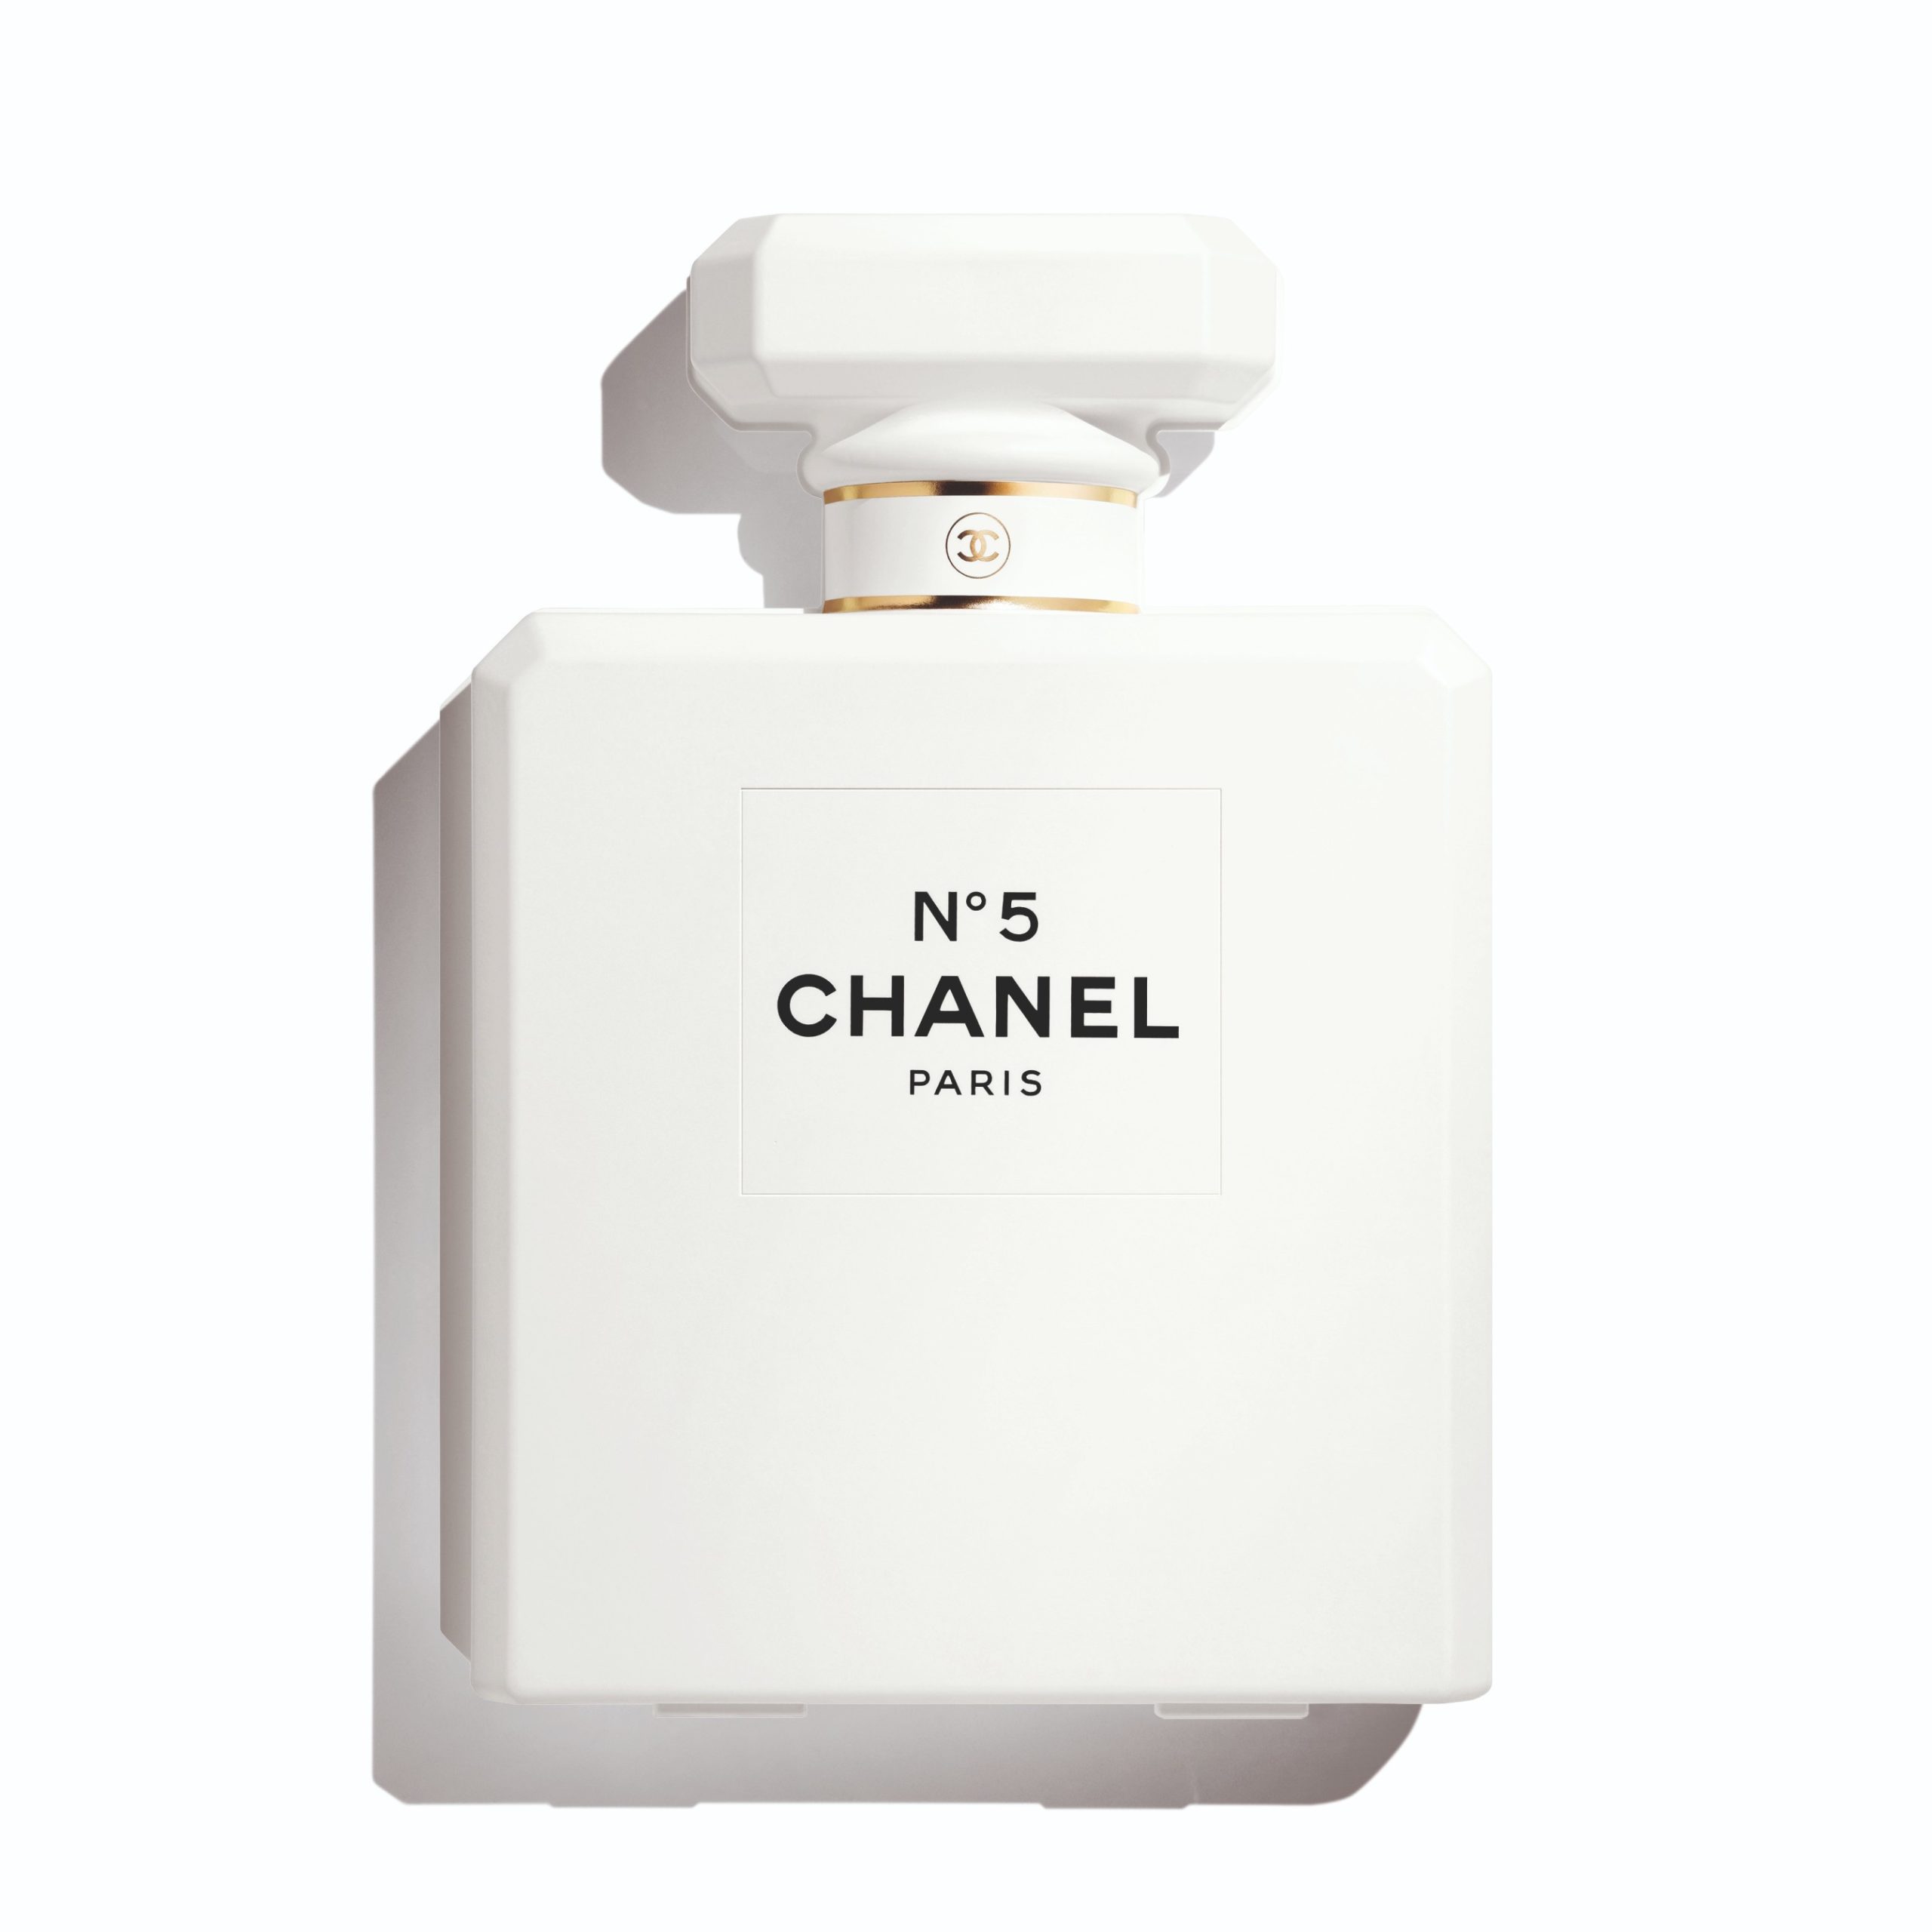 Meet Chanel Beauty's Limited-Edition N°5 The Calendar - BAGAHOLICBOY